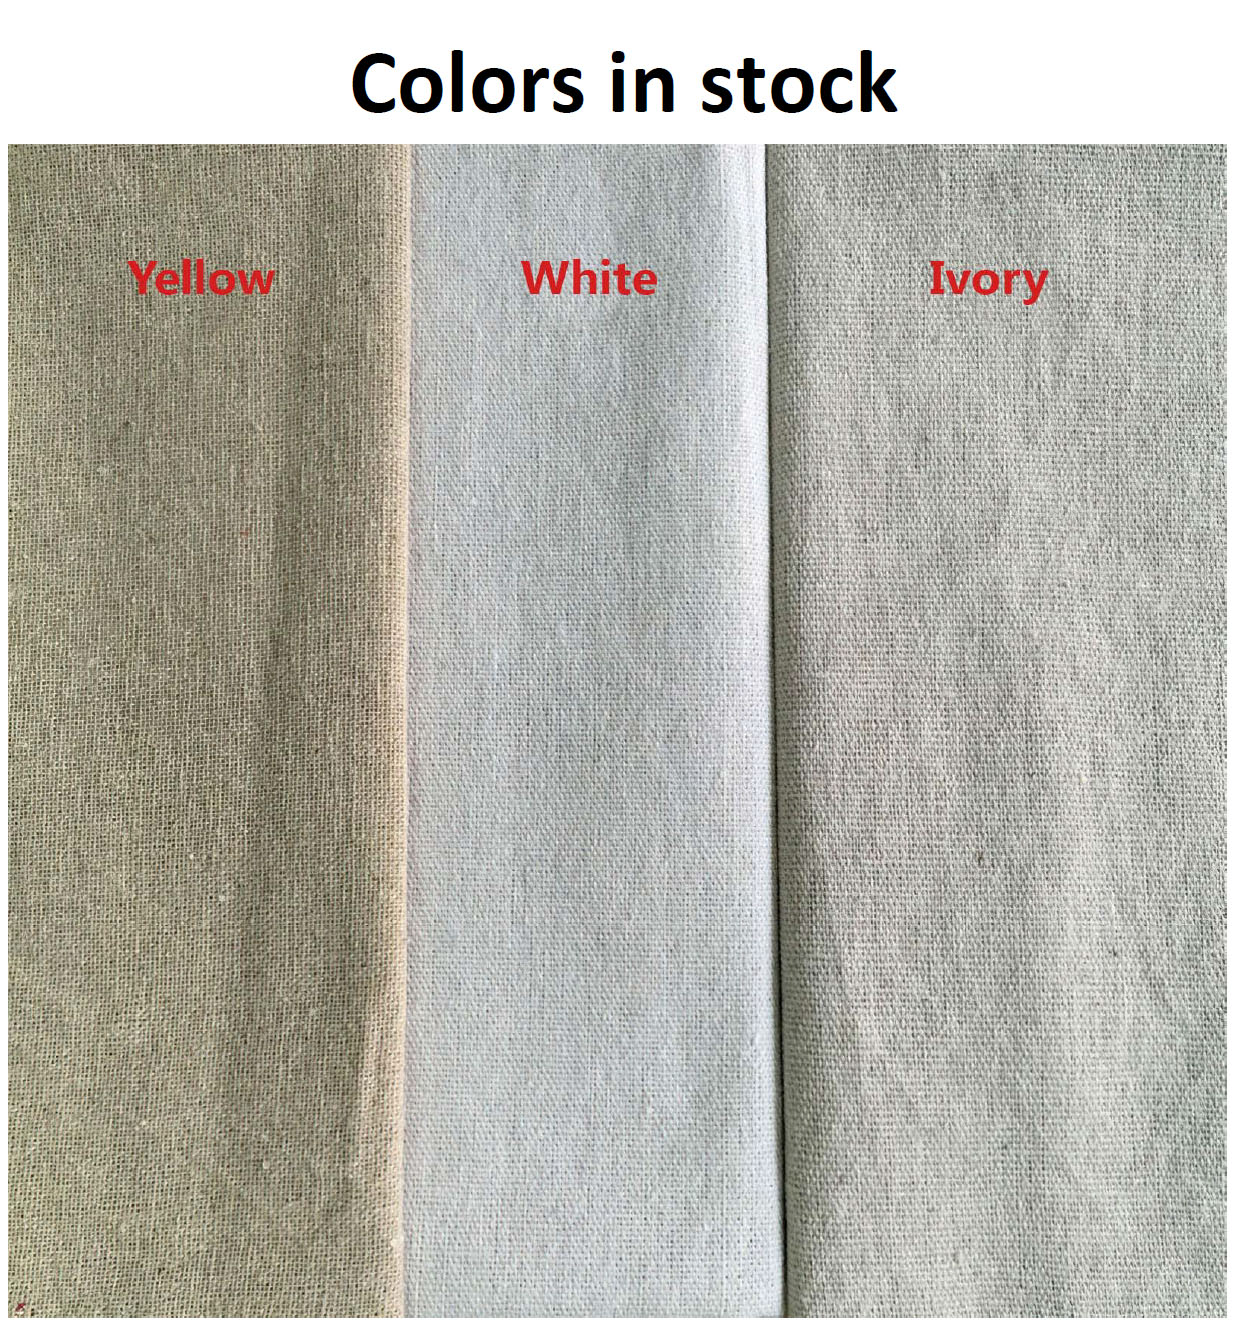 Stocked linen fabric colors